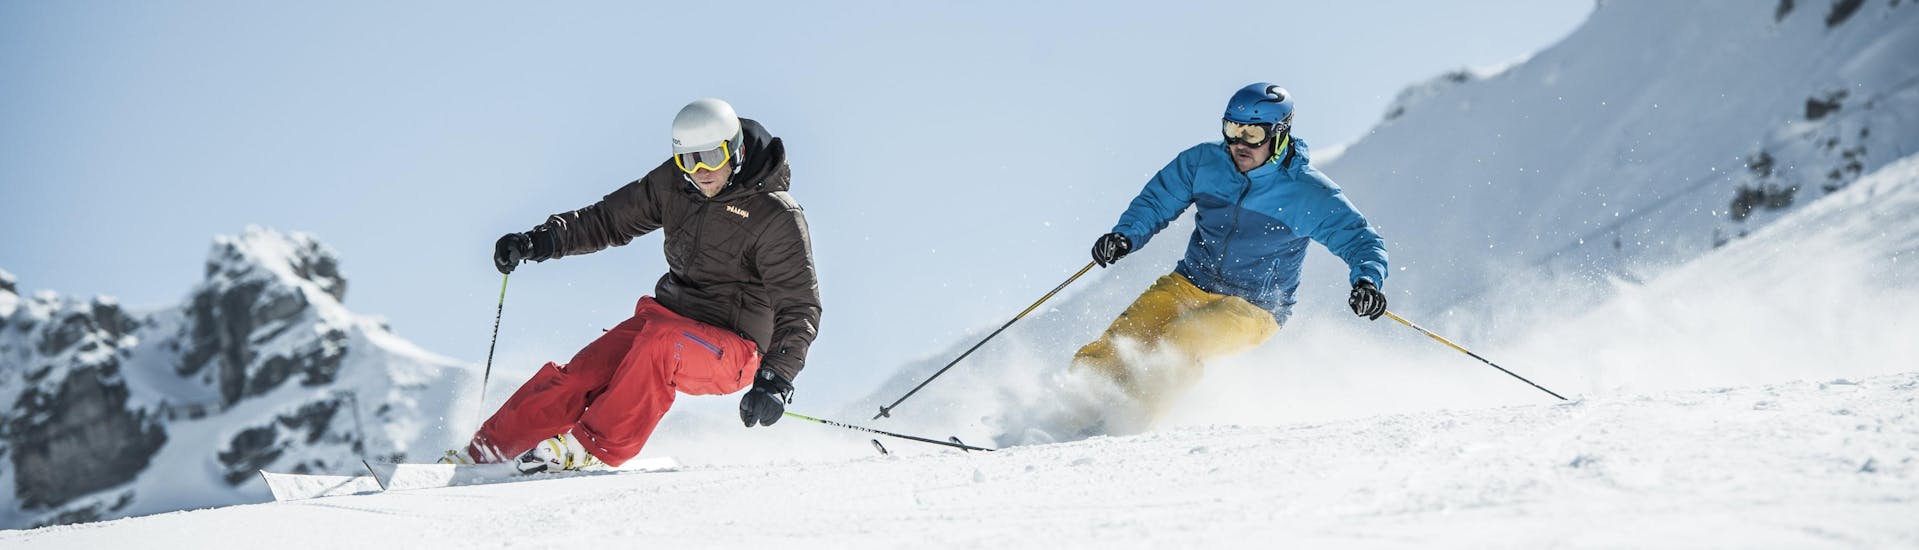 A skier practices the correct skiing technique during one of the private lessons in Leysin-Les Mosses-La Lécherette.